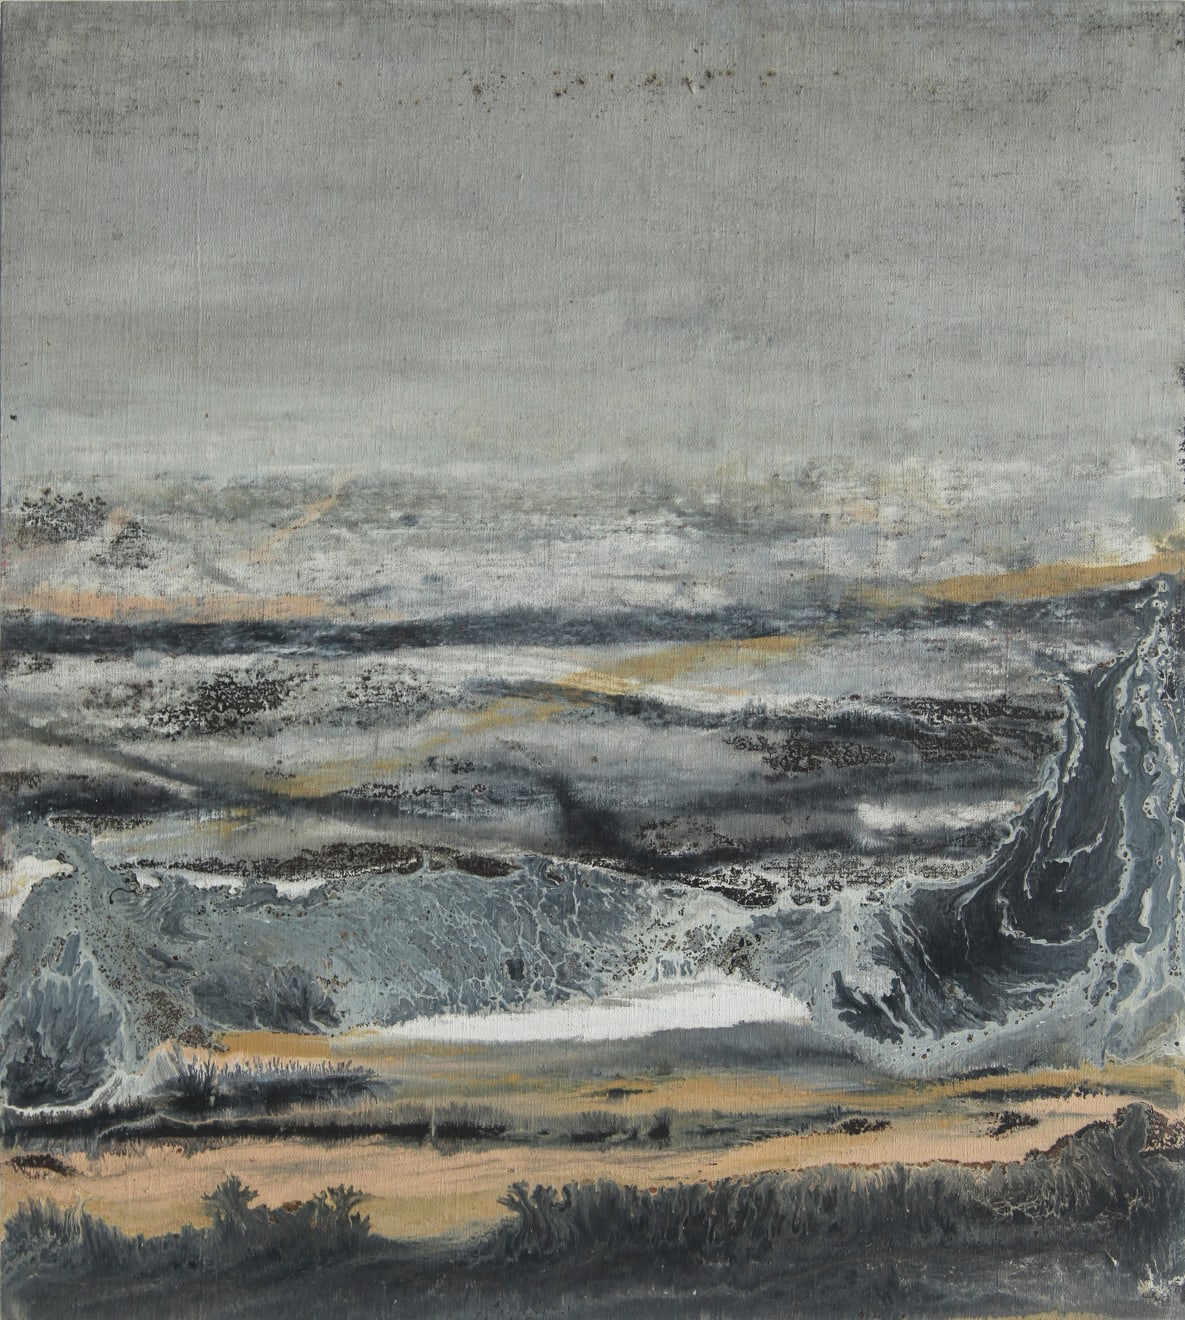 Estuary 03 Oil and Acrylic on Linen Mounted Board 53 x 63.5cm AUD $1400 SOLD